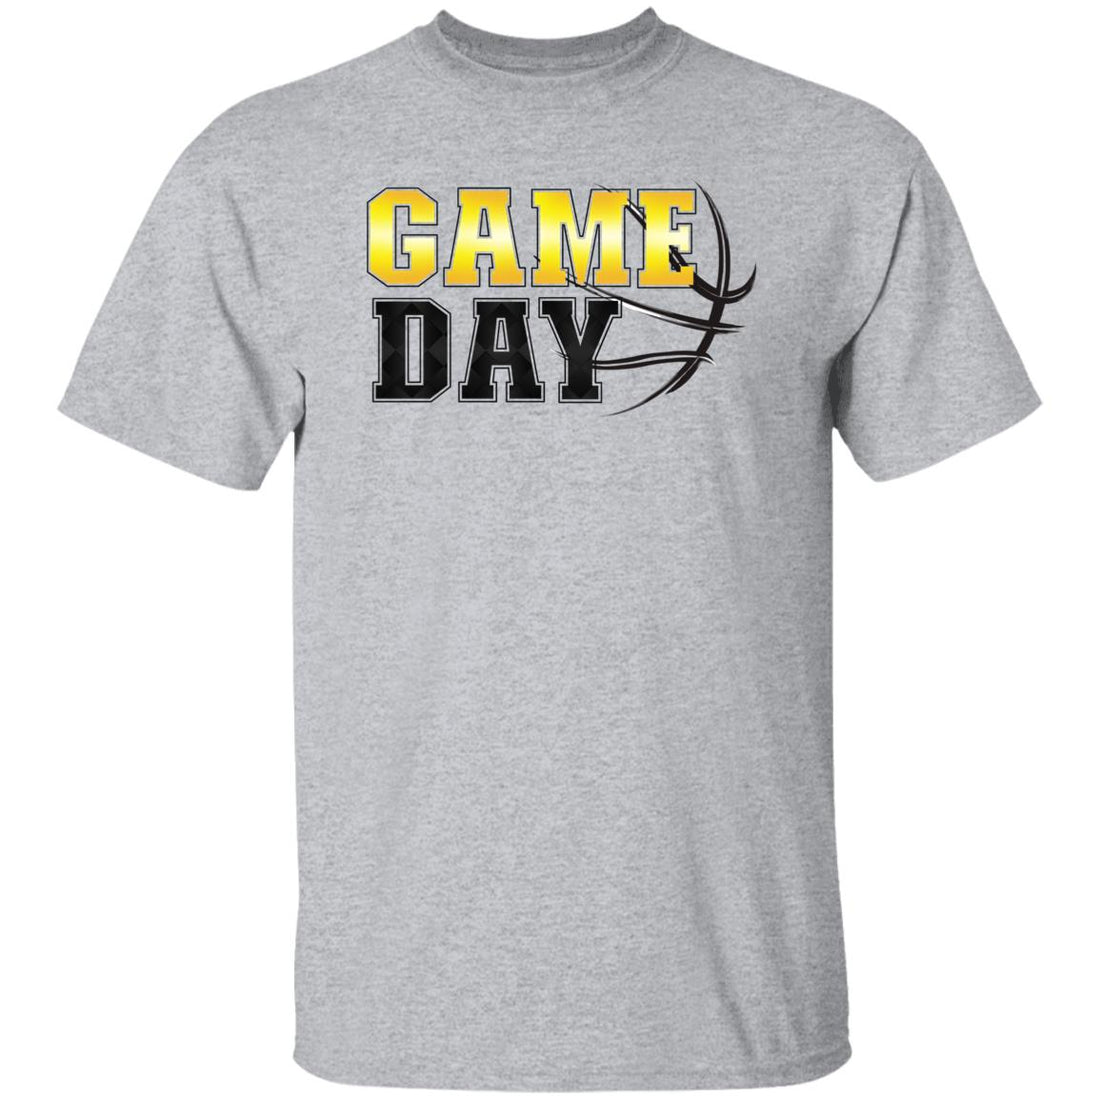 Game Day in Shock T-Shirt - T-Shirts - Positively Sassy - Game Day in Shock T-Shirt